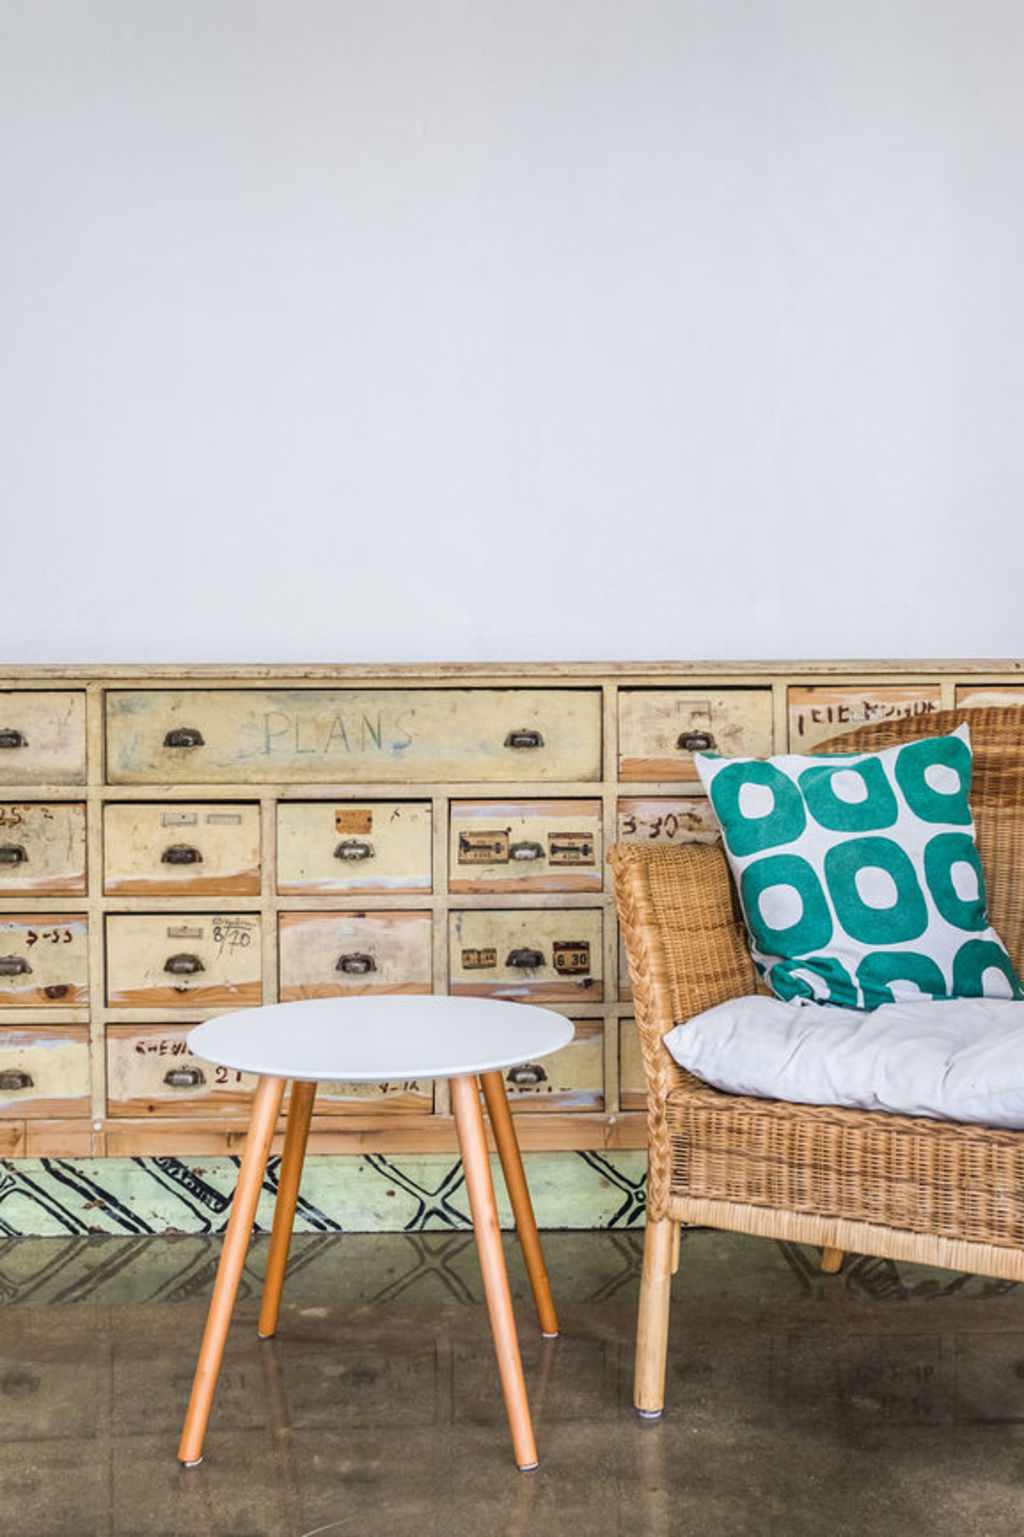 Upcycle old pieces into storage solutions. Photo: Stocksy